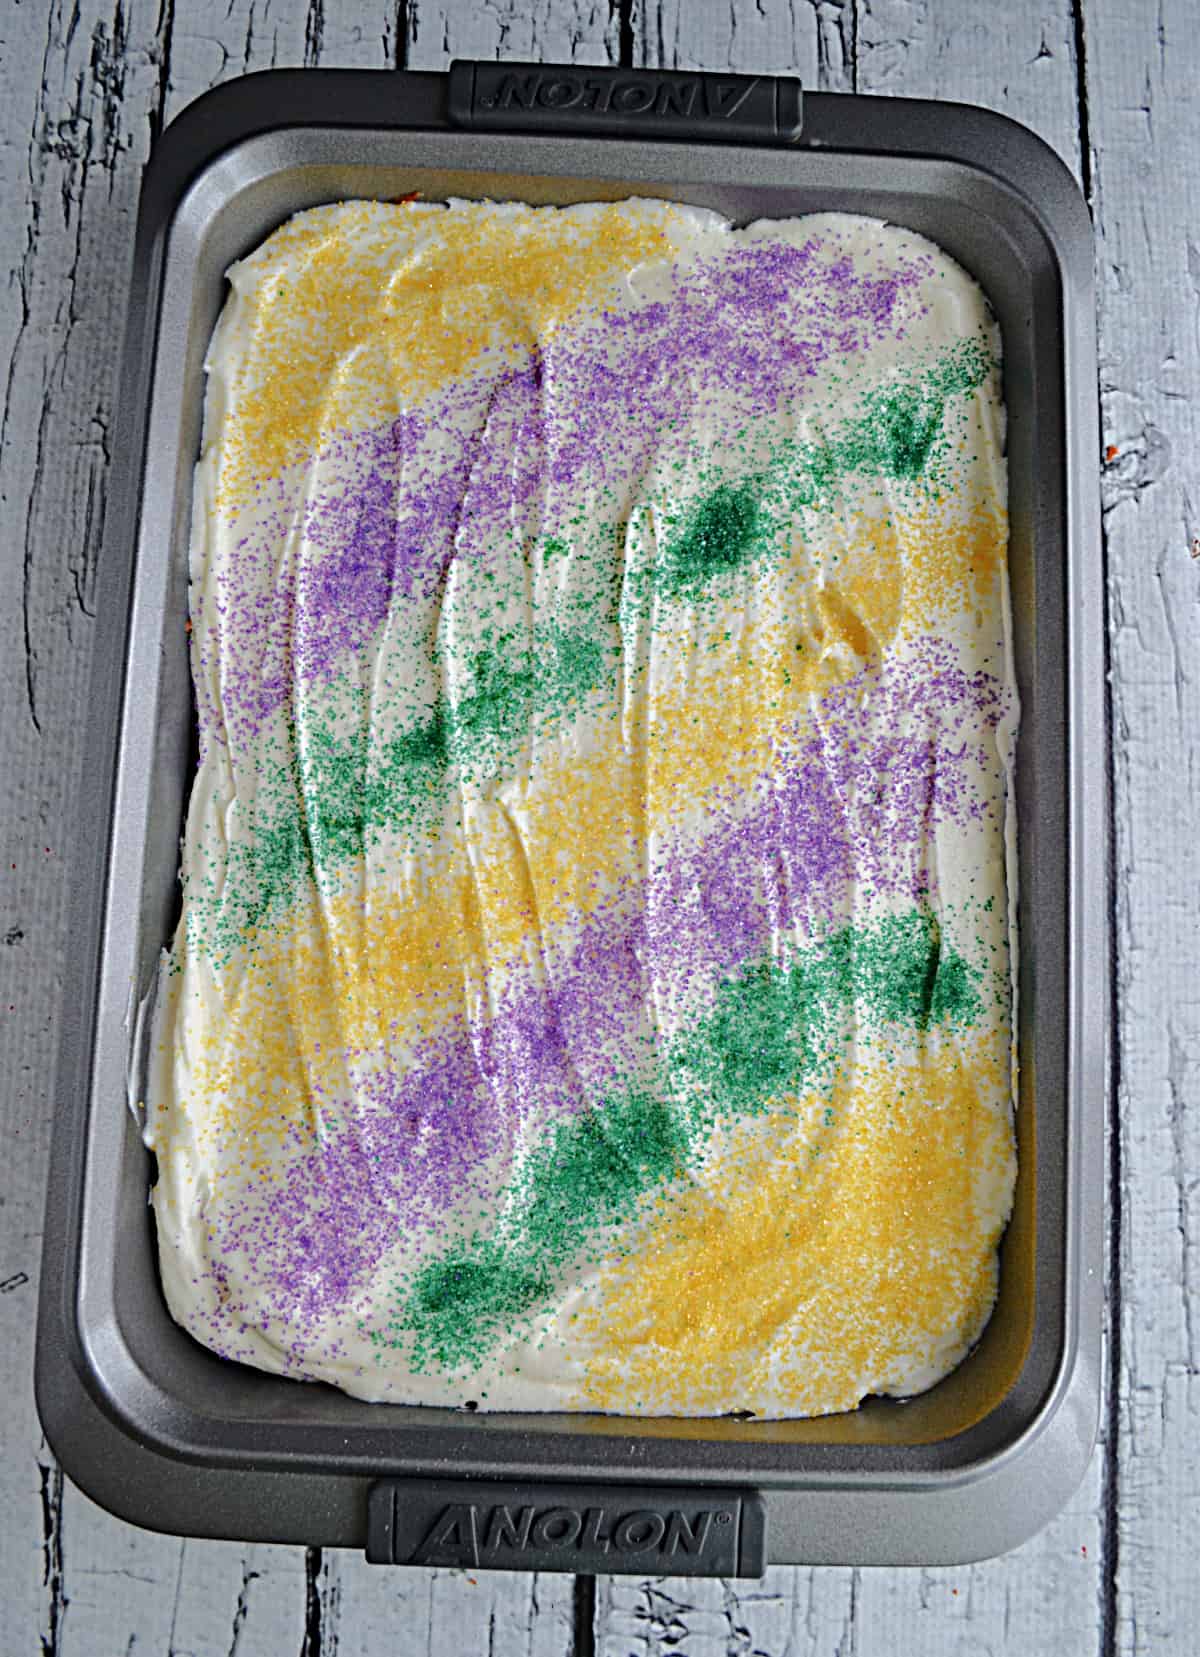 A Mardi Gras cake with yellow, green, and purple sprinkles.